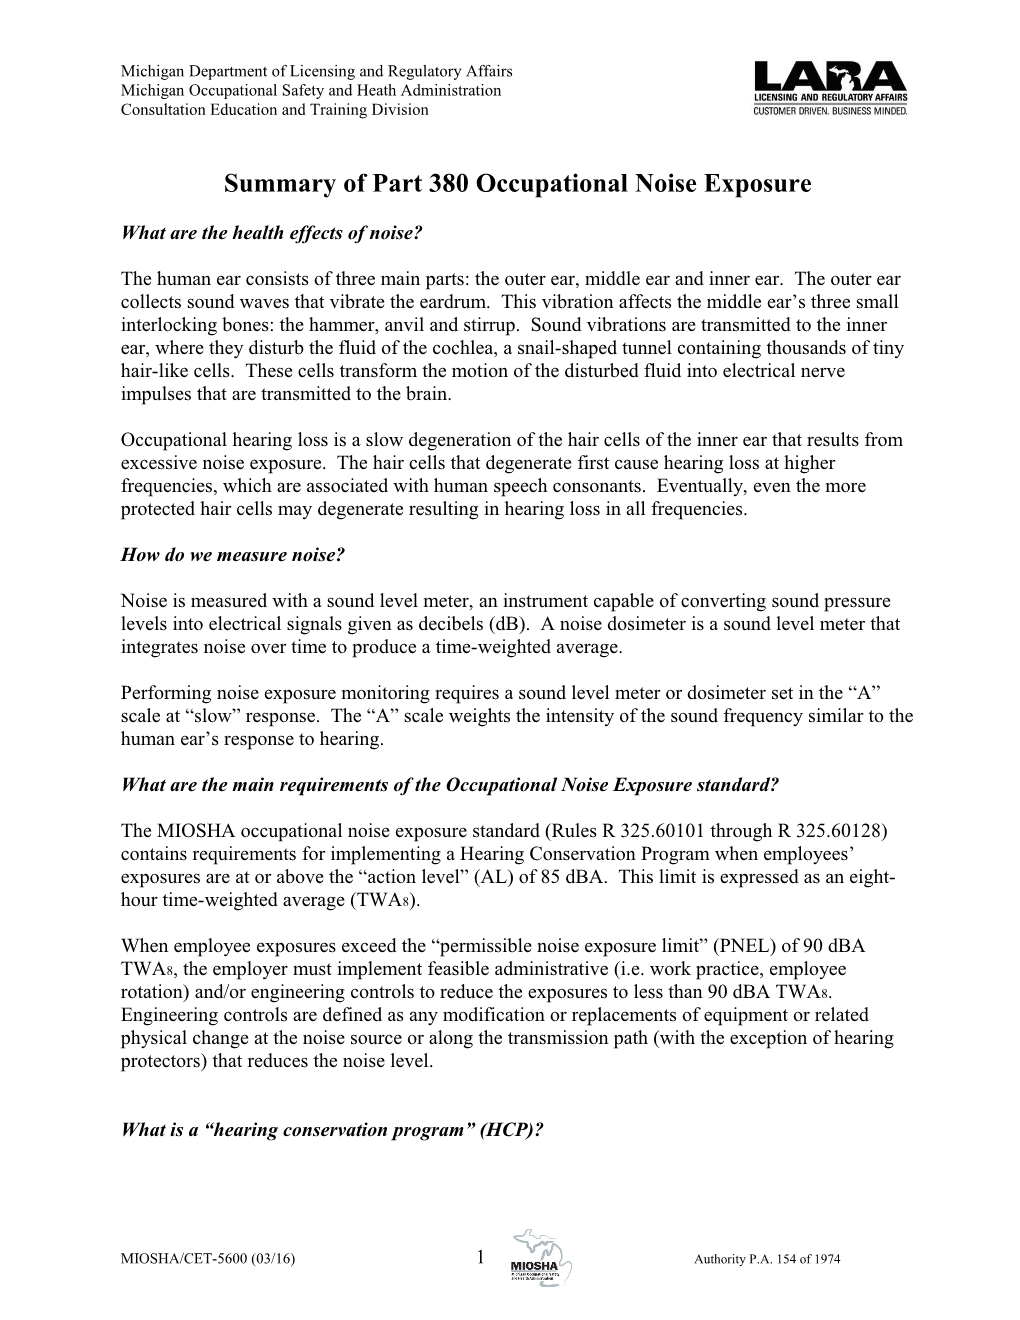 Summary of Part 380 Occupational Noise Exposure